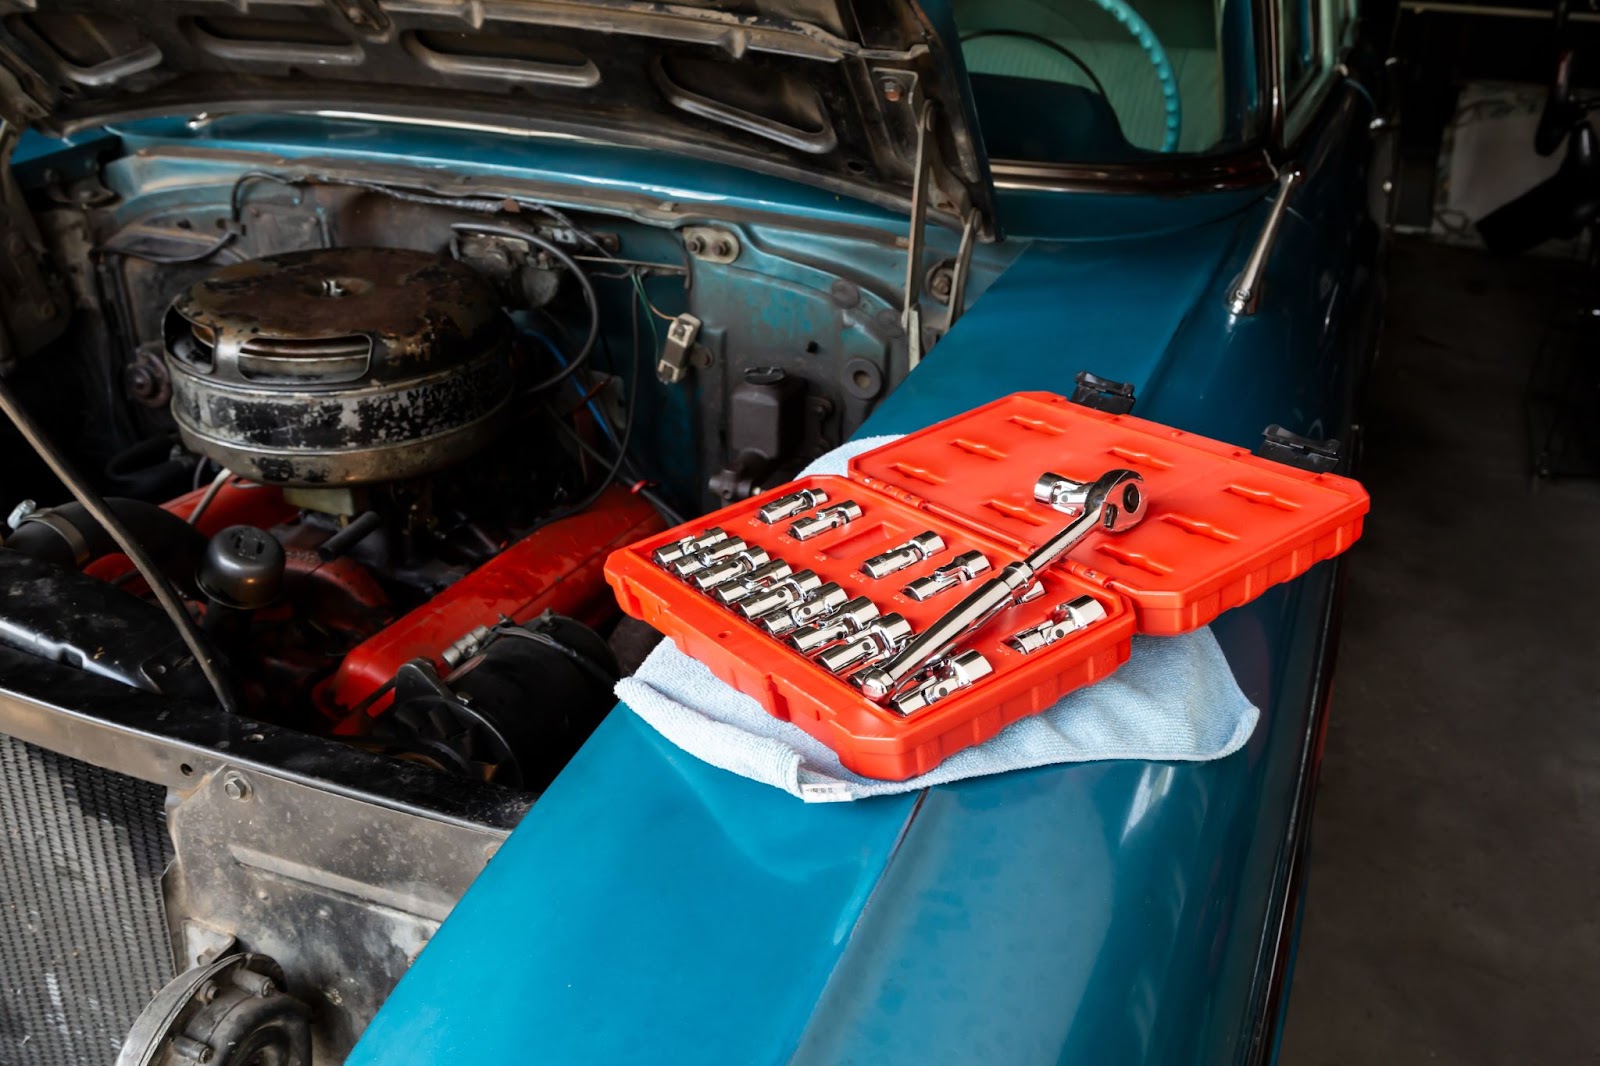 Essential Tools And Equipment Needed To Restore A Classic Car